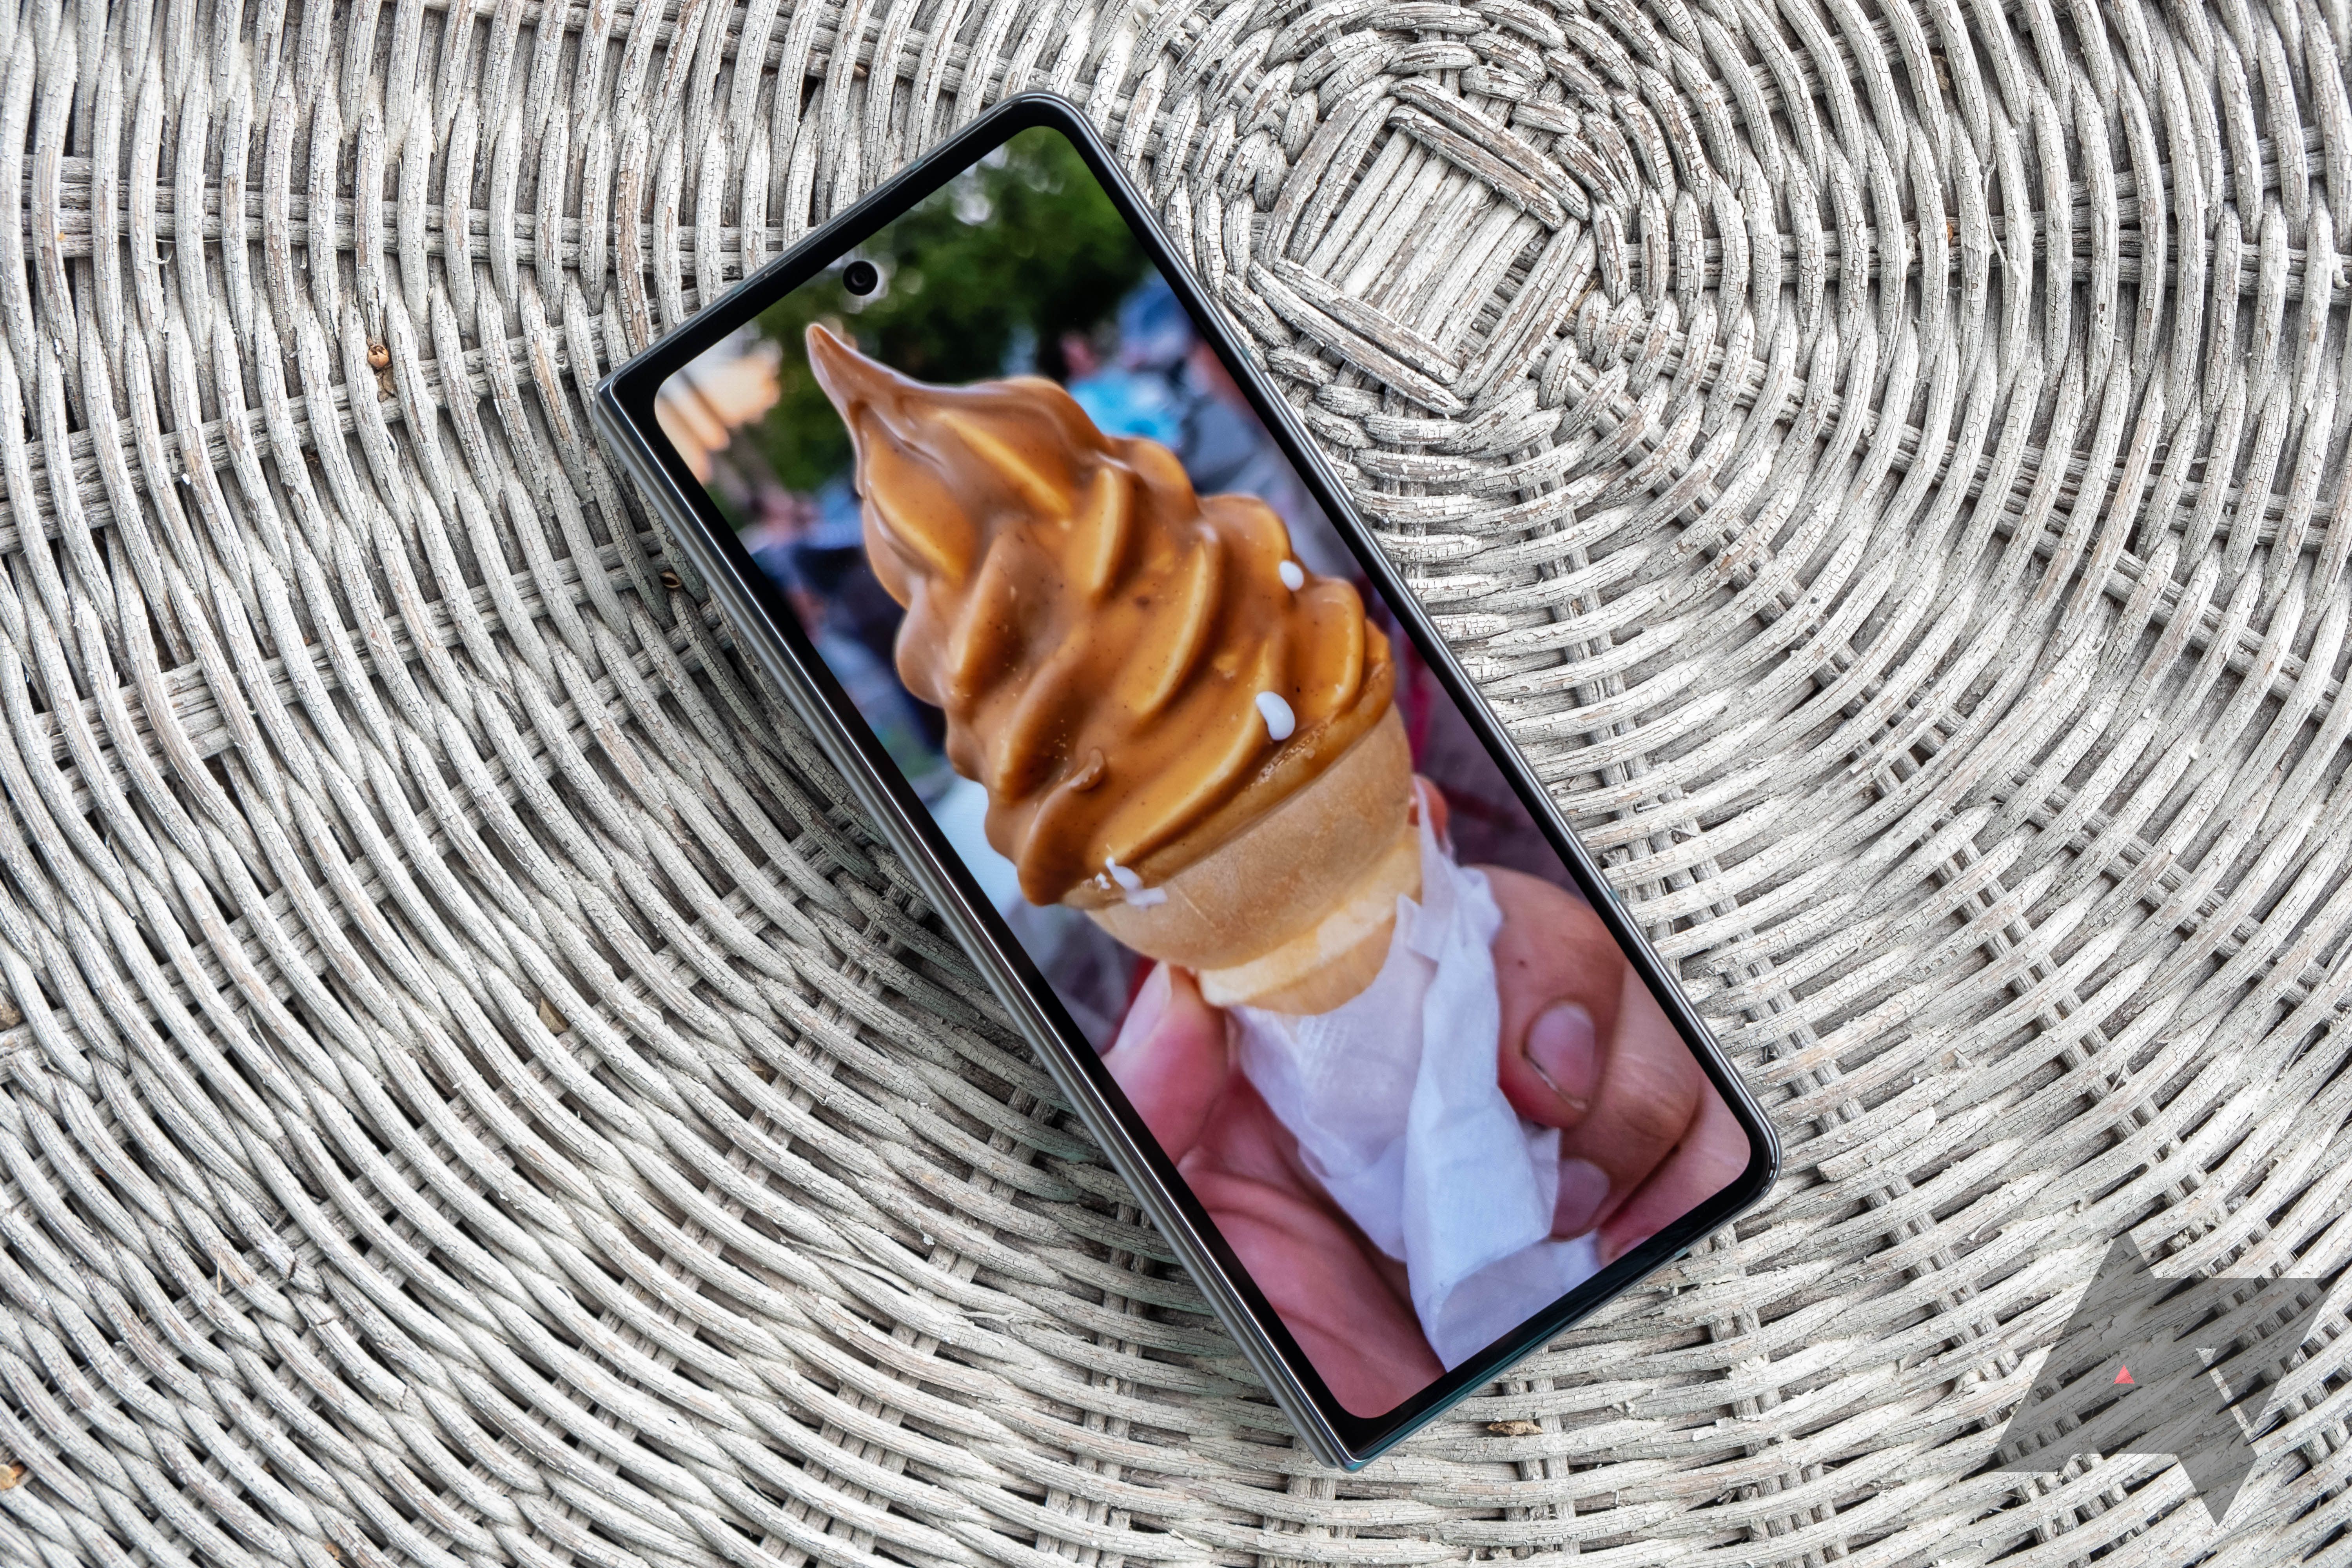 The Samsung Galaxy Fold 4 sitting on a wicker tabletop and showing an ice cream cone on its wallpaper